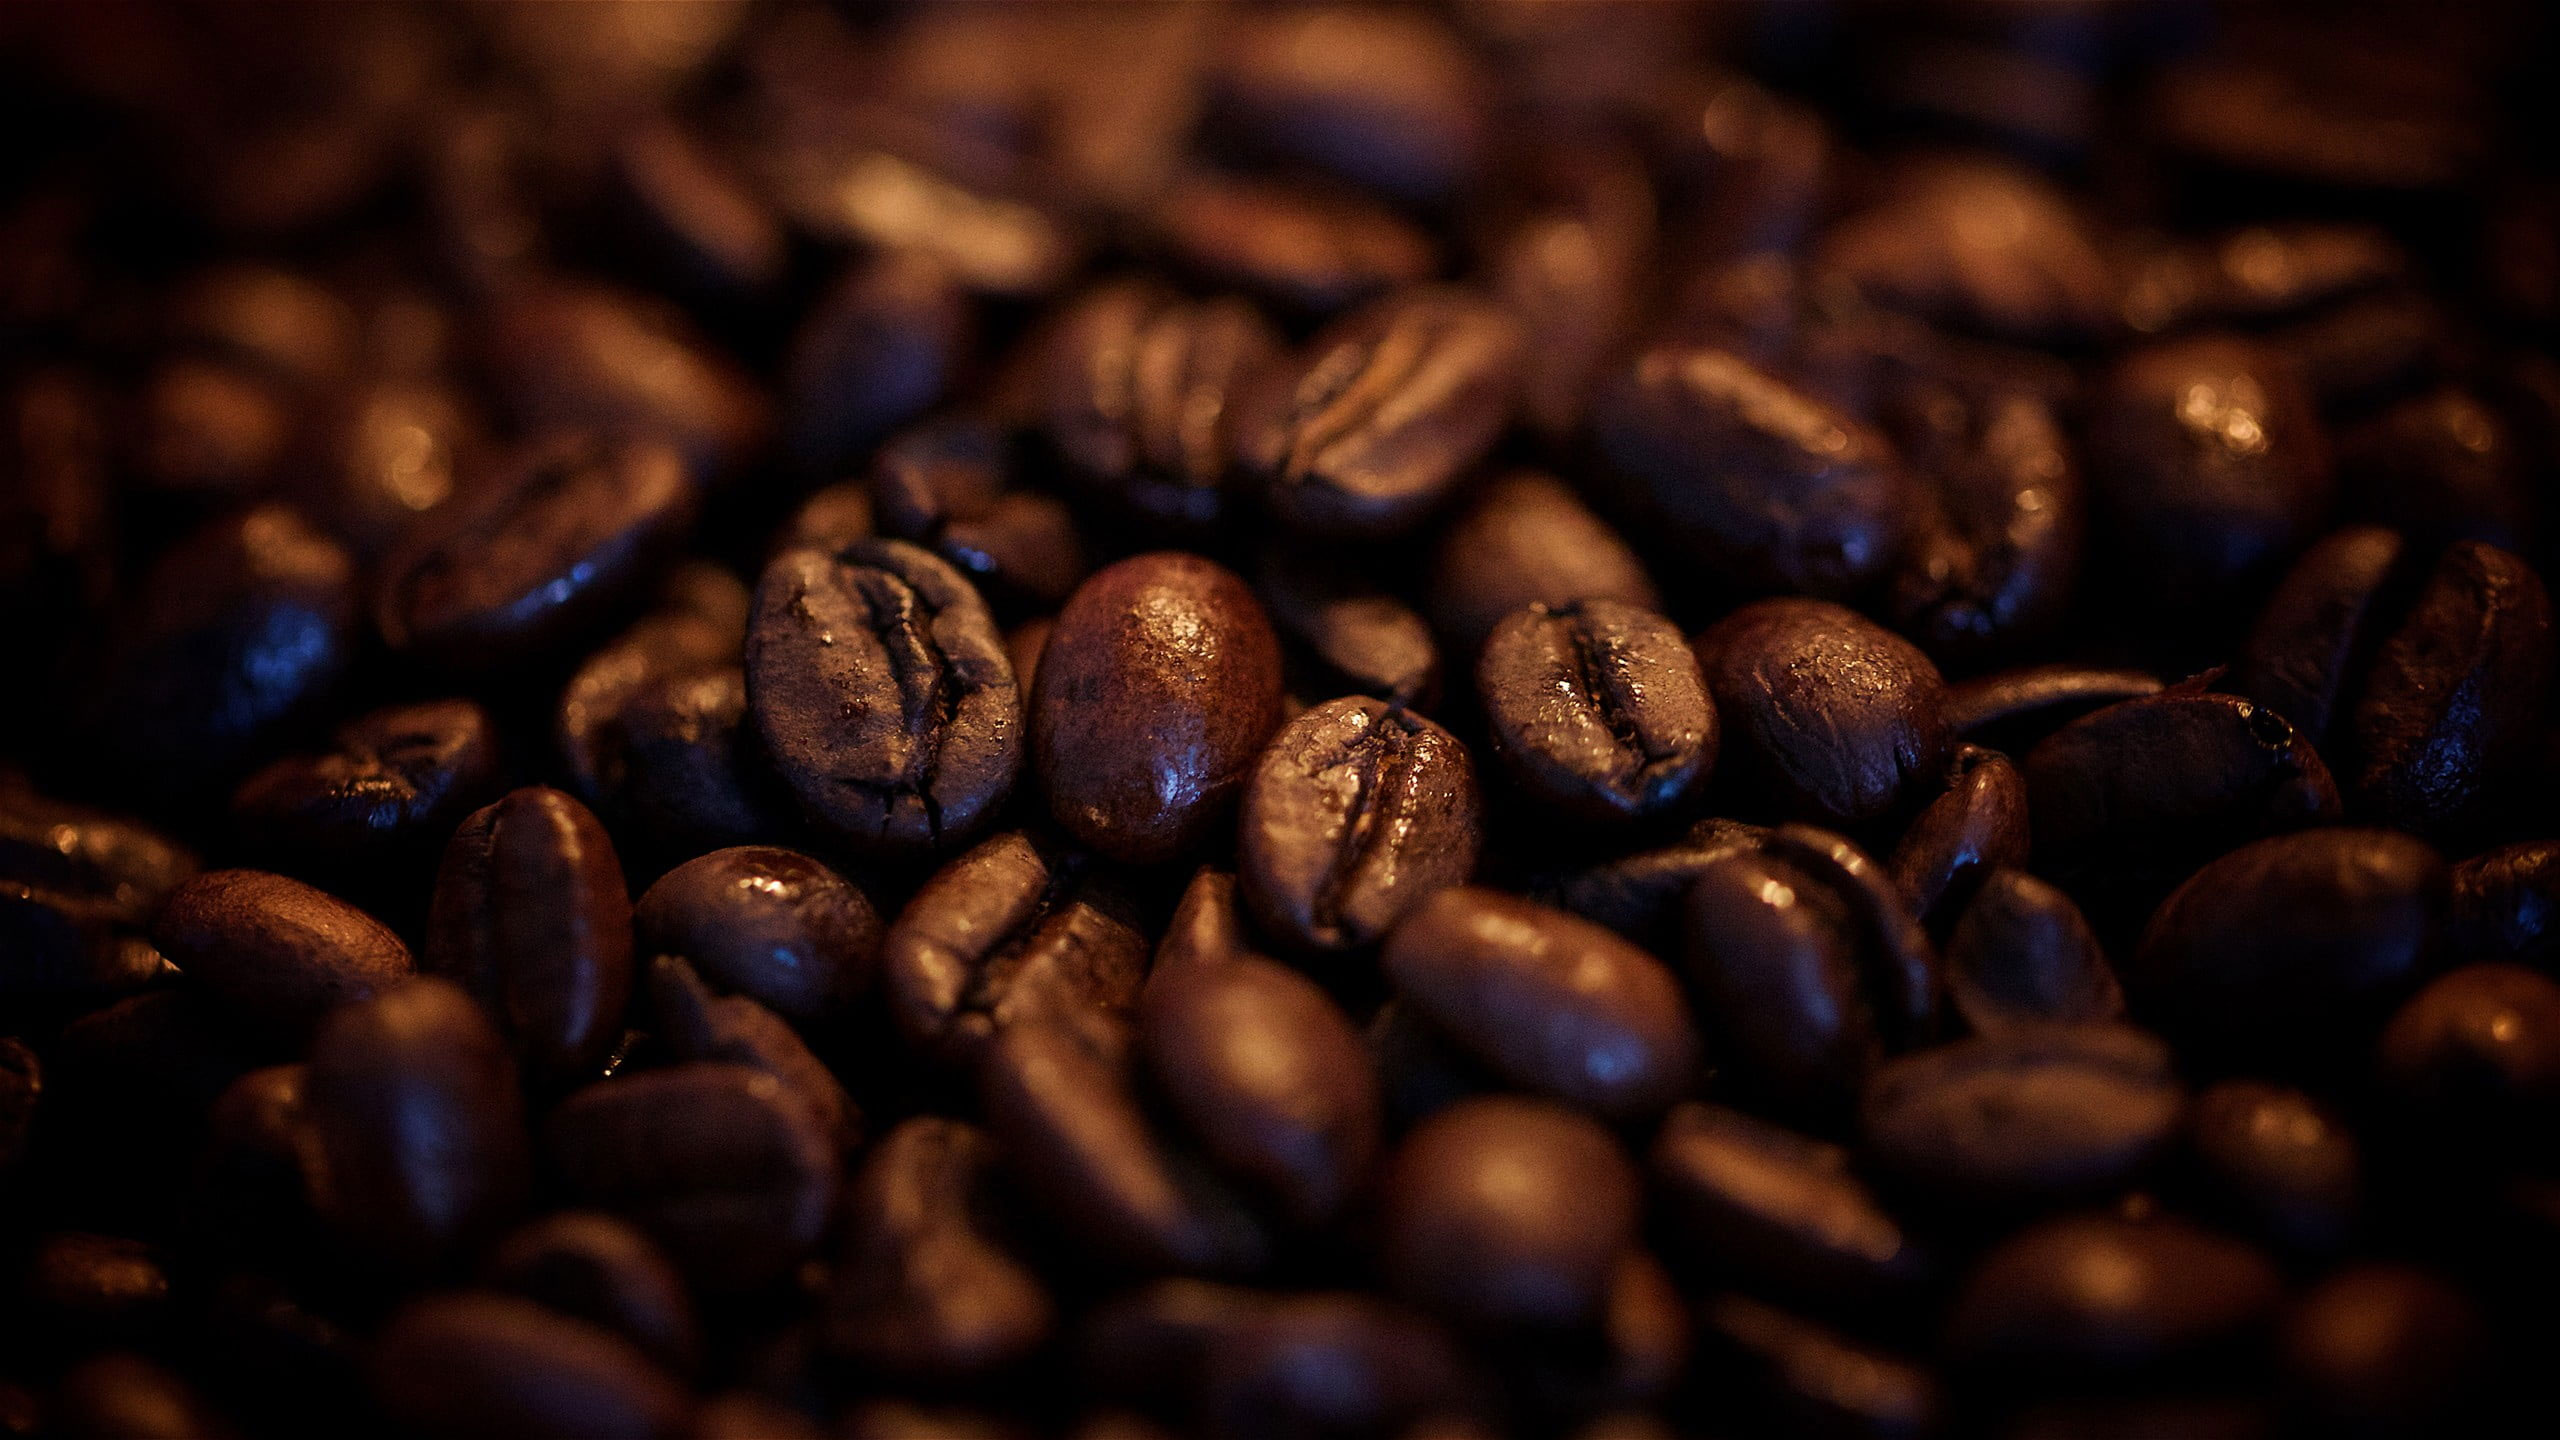 Coffee beans wallpaper, food and drink, roasted coffee bean, coffee - drink